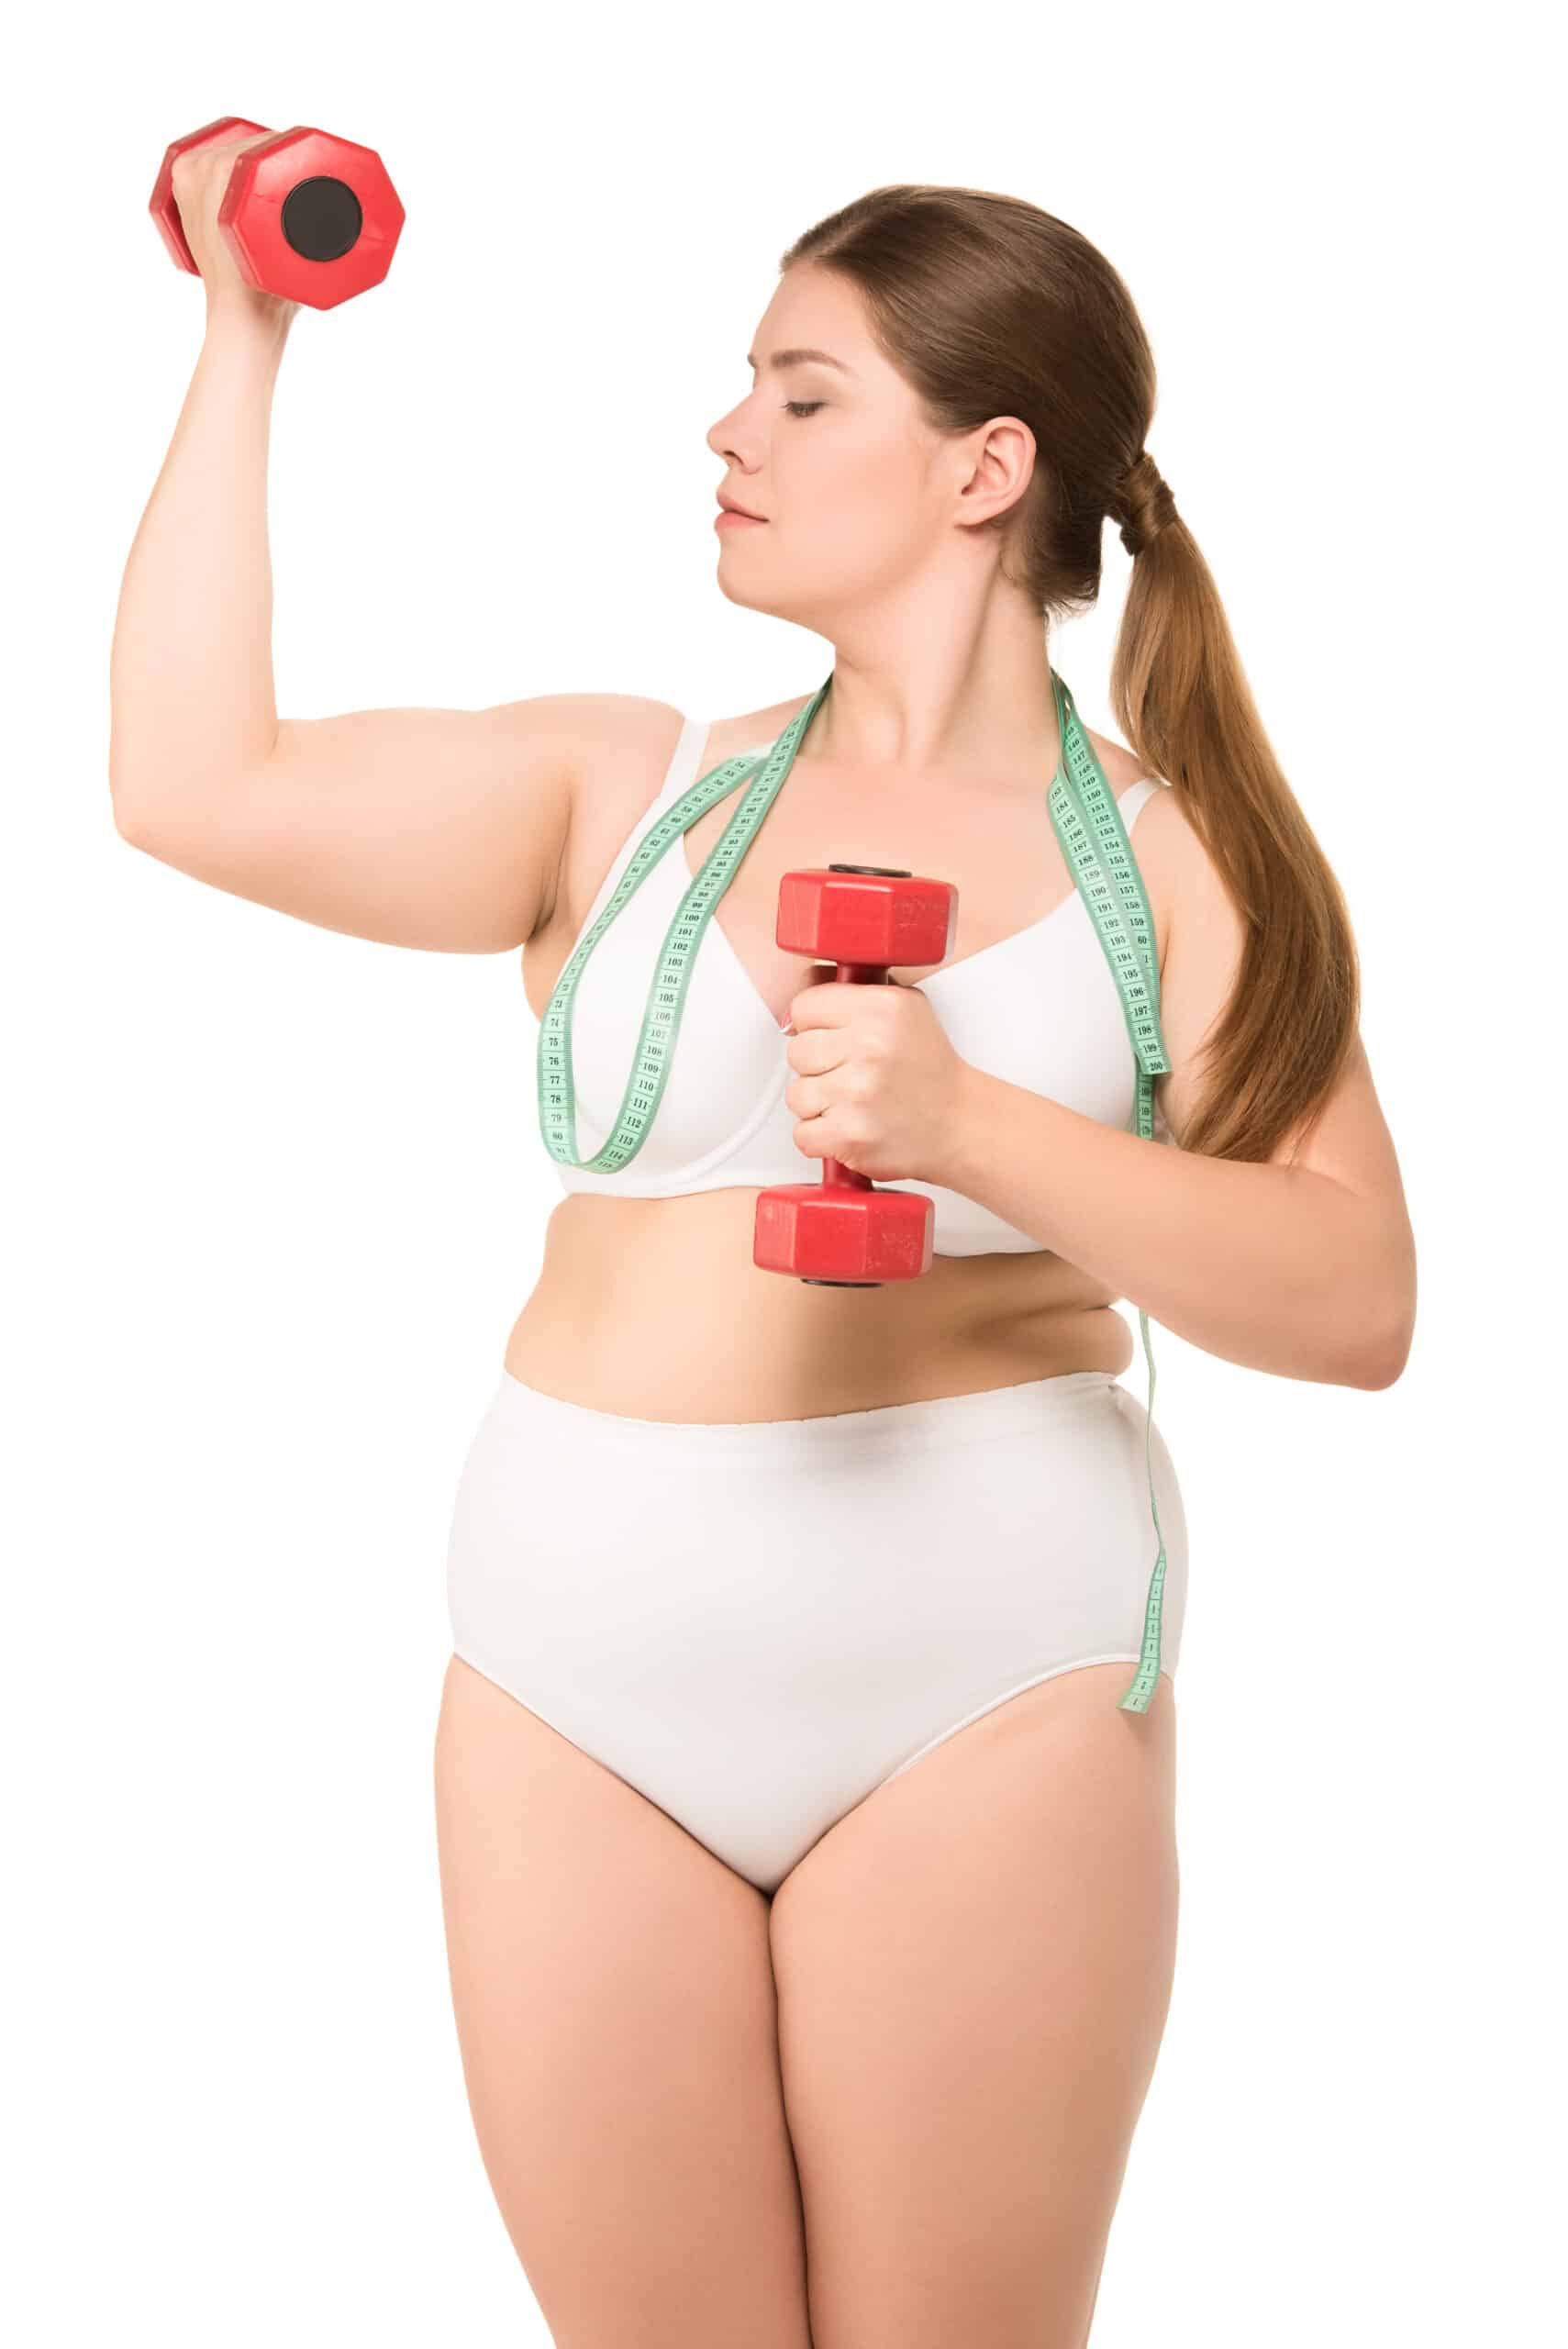 fat woman with measuring tape training with dumbbe 2022 11 16 22 03 57 utc scaled